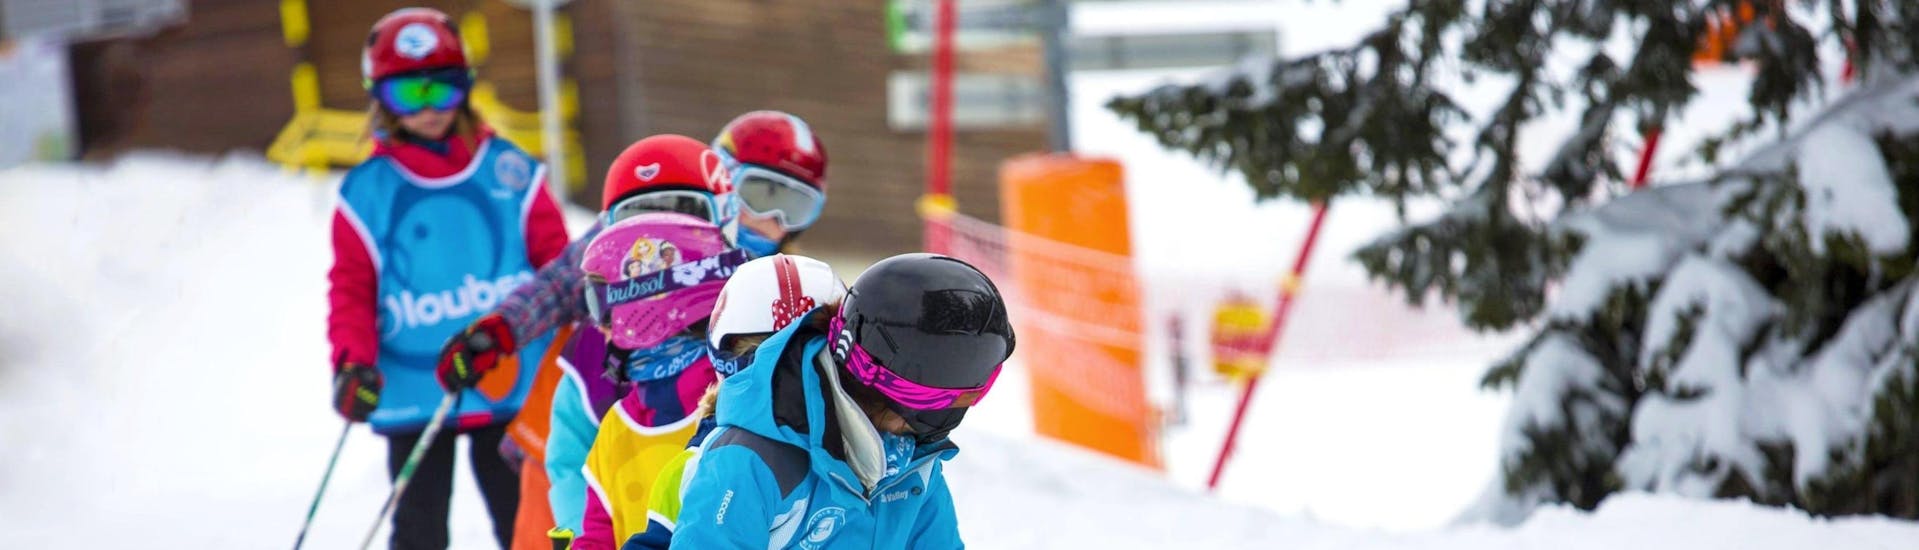 Kids Ski Lessons (6-13 y.) for Experienced Skiers.